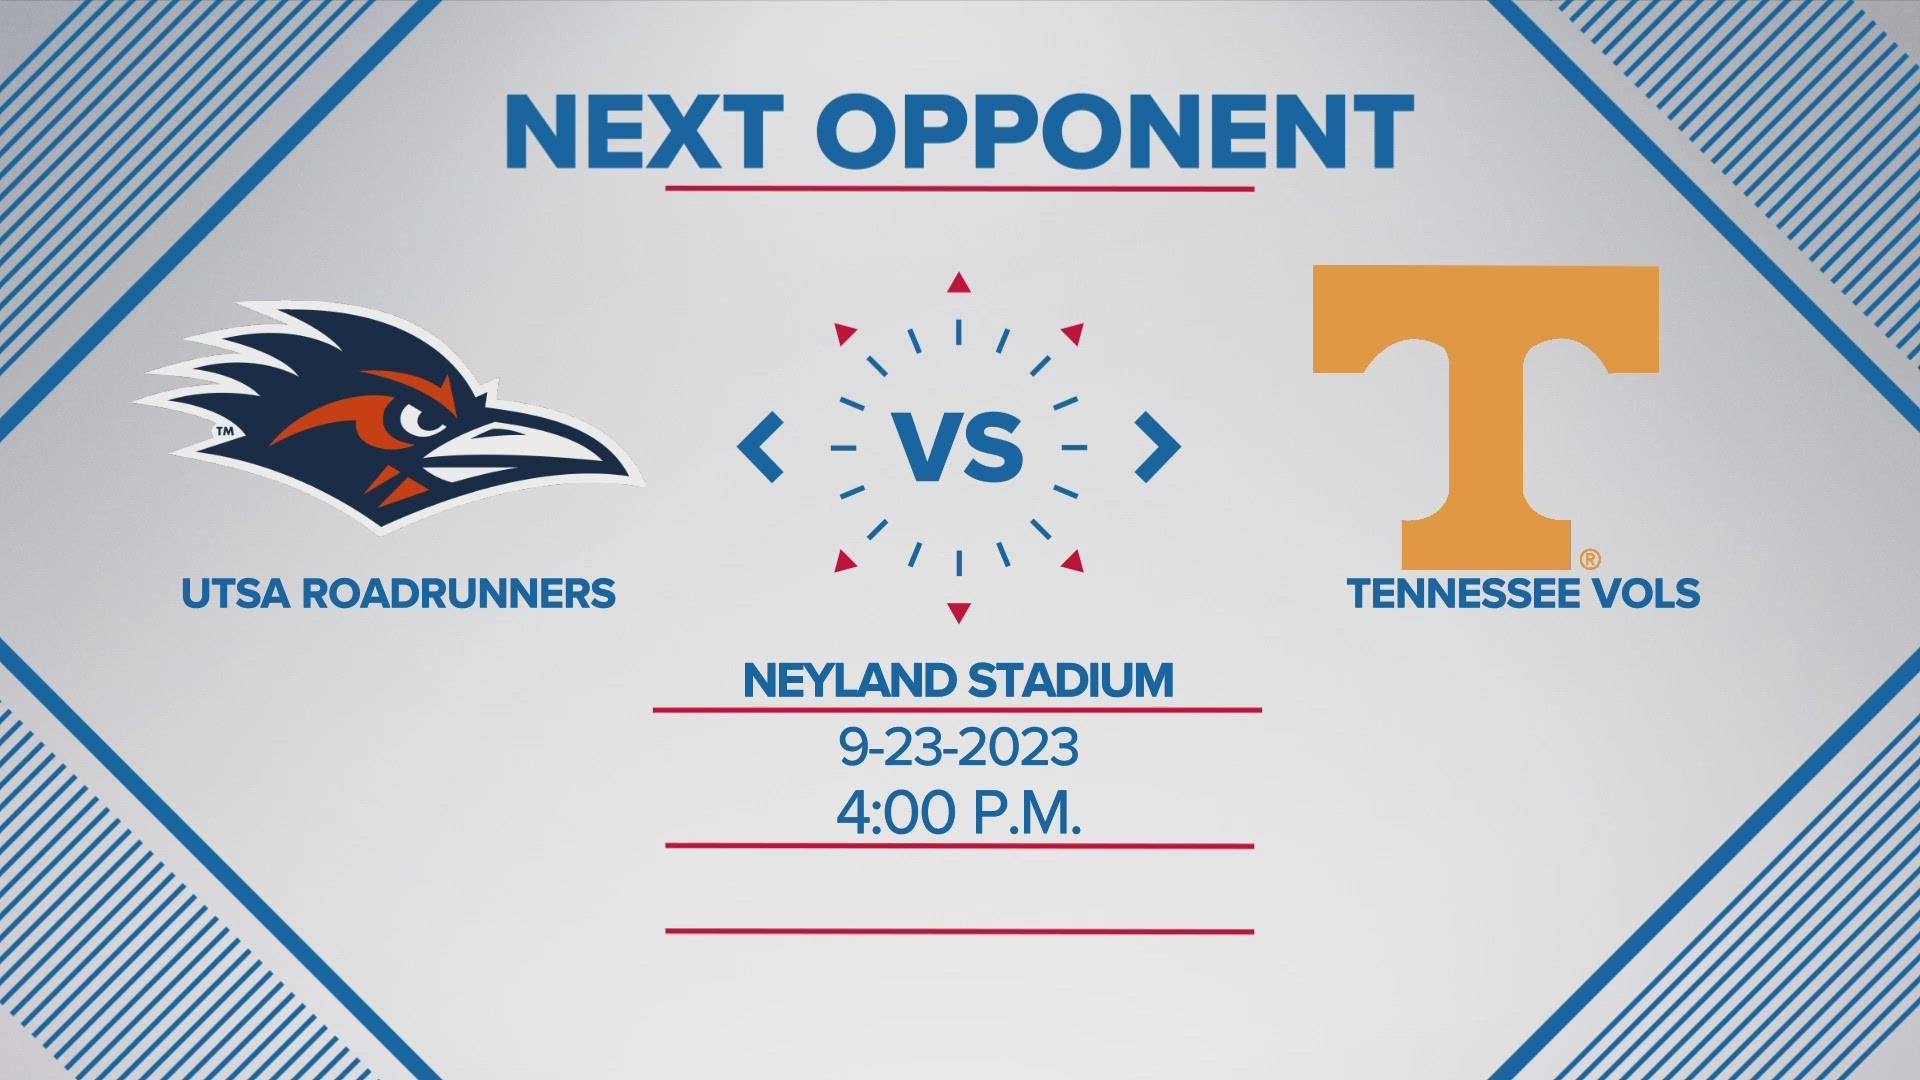 The game will begin in Neyland Stadium at 4 p.m. on Saturday, Sept. 23.